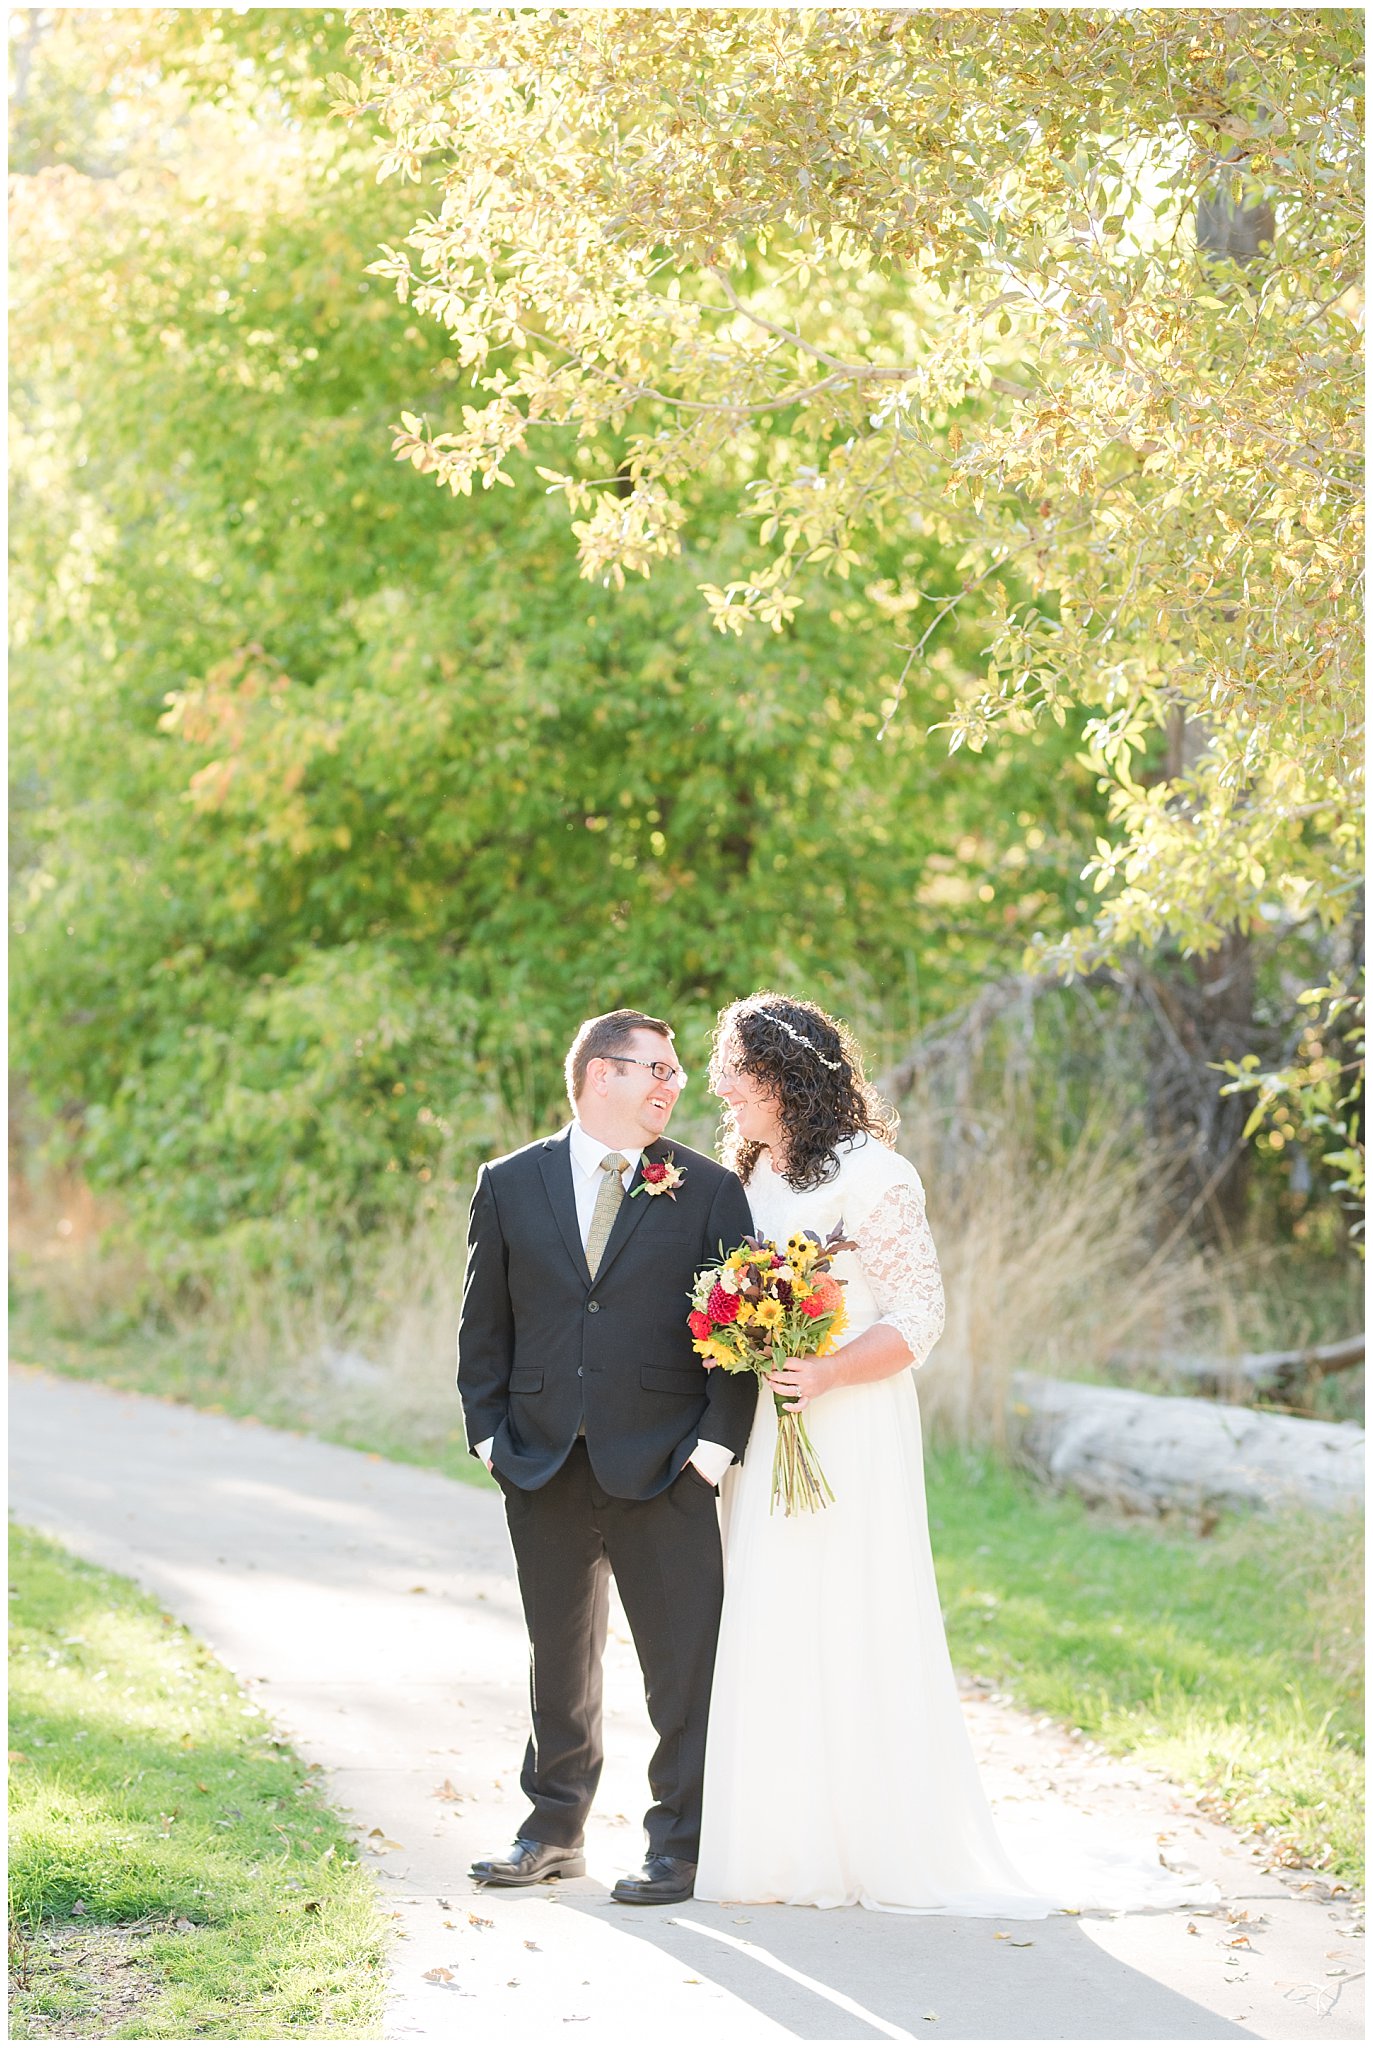 Groom in black suit and gold tie, bride in simple lace sleeve wedding dress with fall bouquet at Denzil Stewart Nature Park | Logan Temple Fall Formal Session | Jessie and Dallin Photography